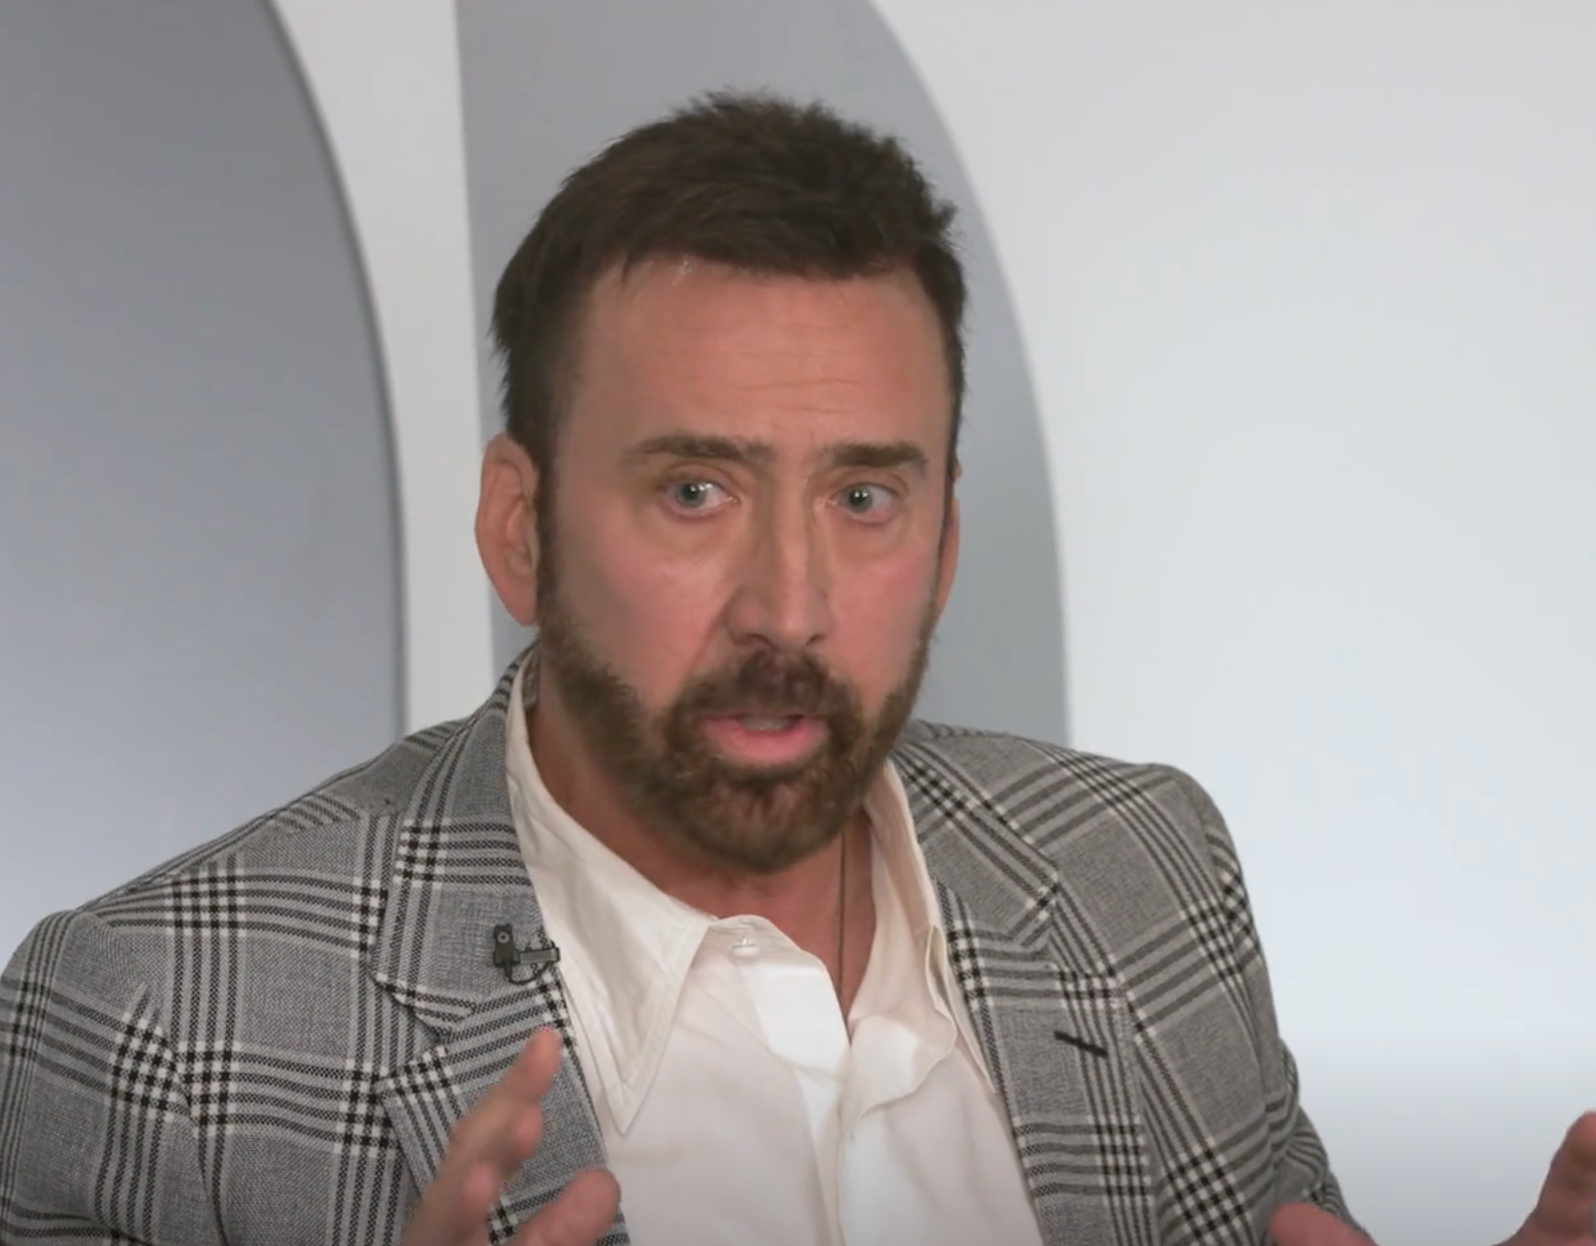 Nicolas cage on ‘The Hollywood Reporter’s actors roundtable